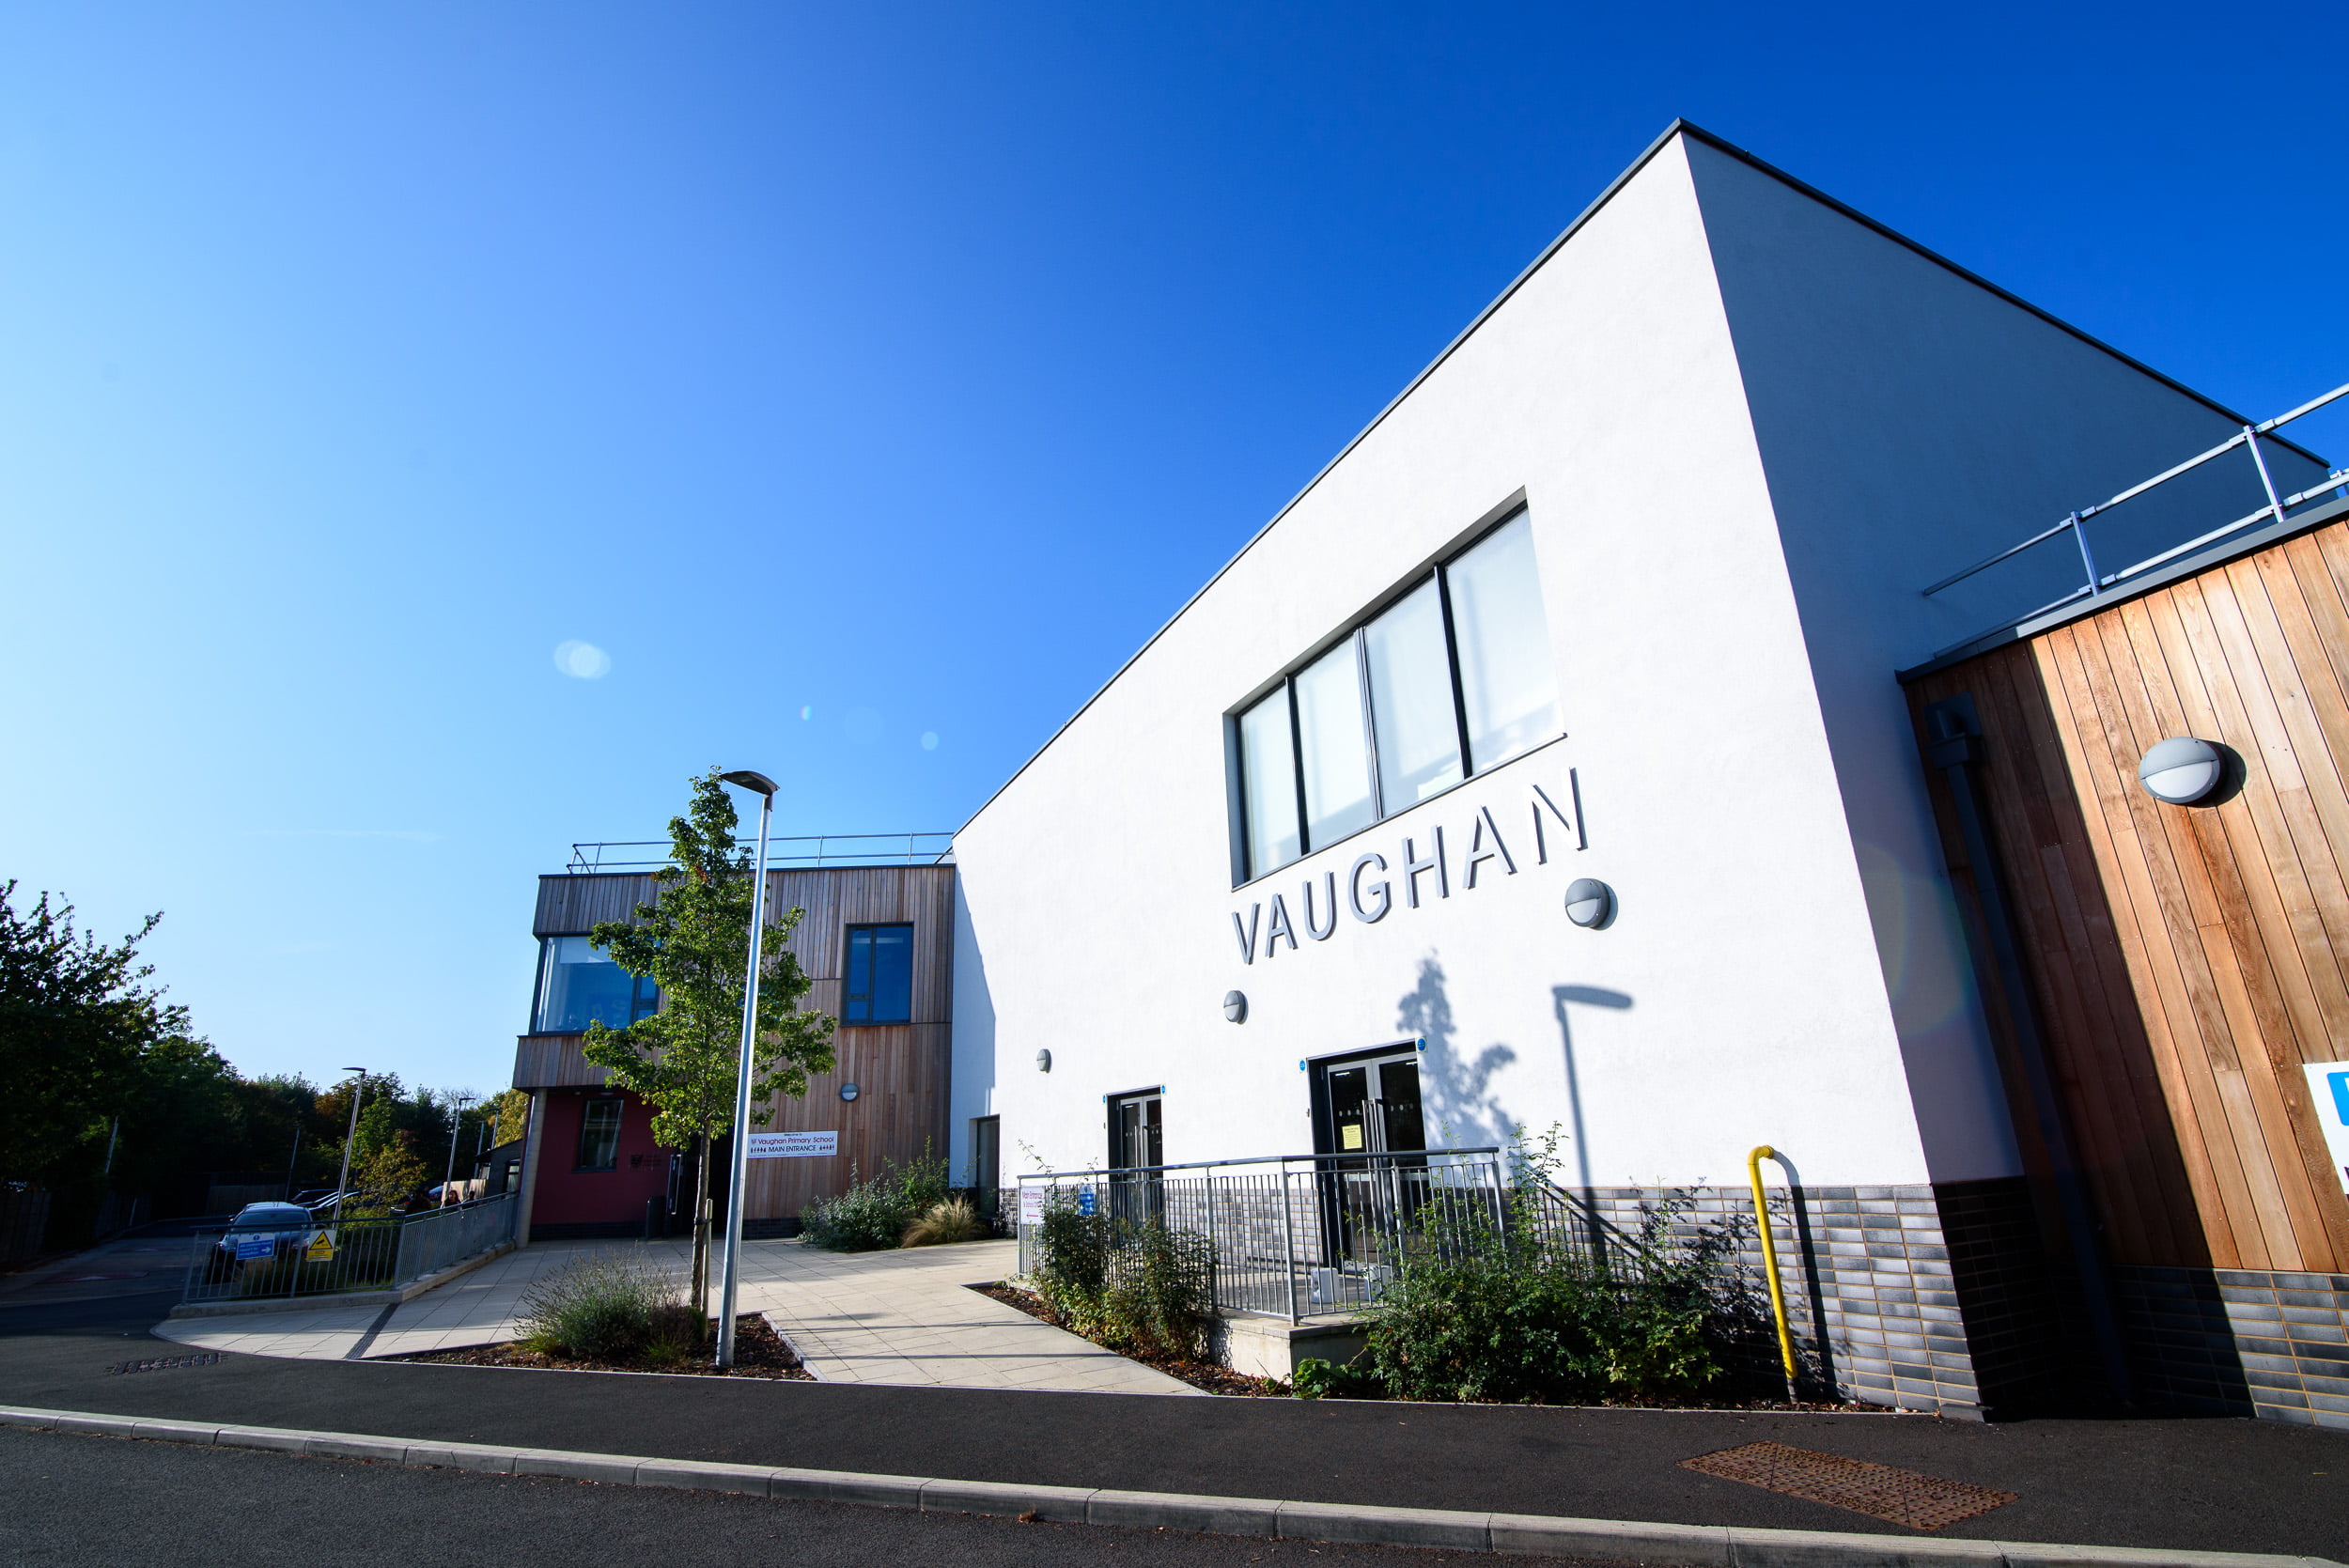 Vaughan Primary  School: Energy audit builds the case for LED lighting